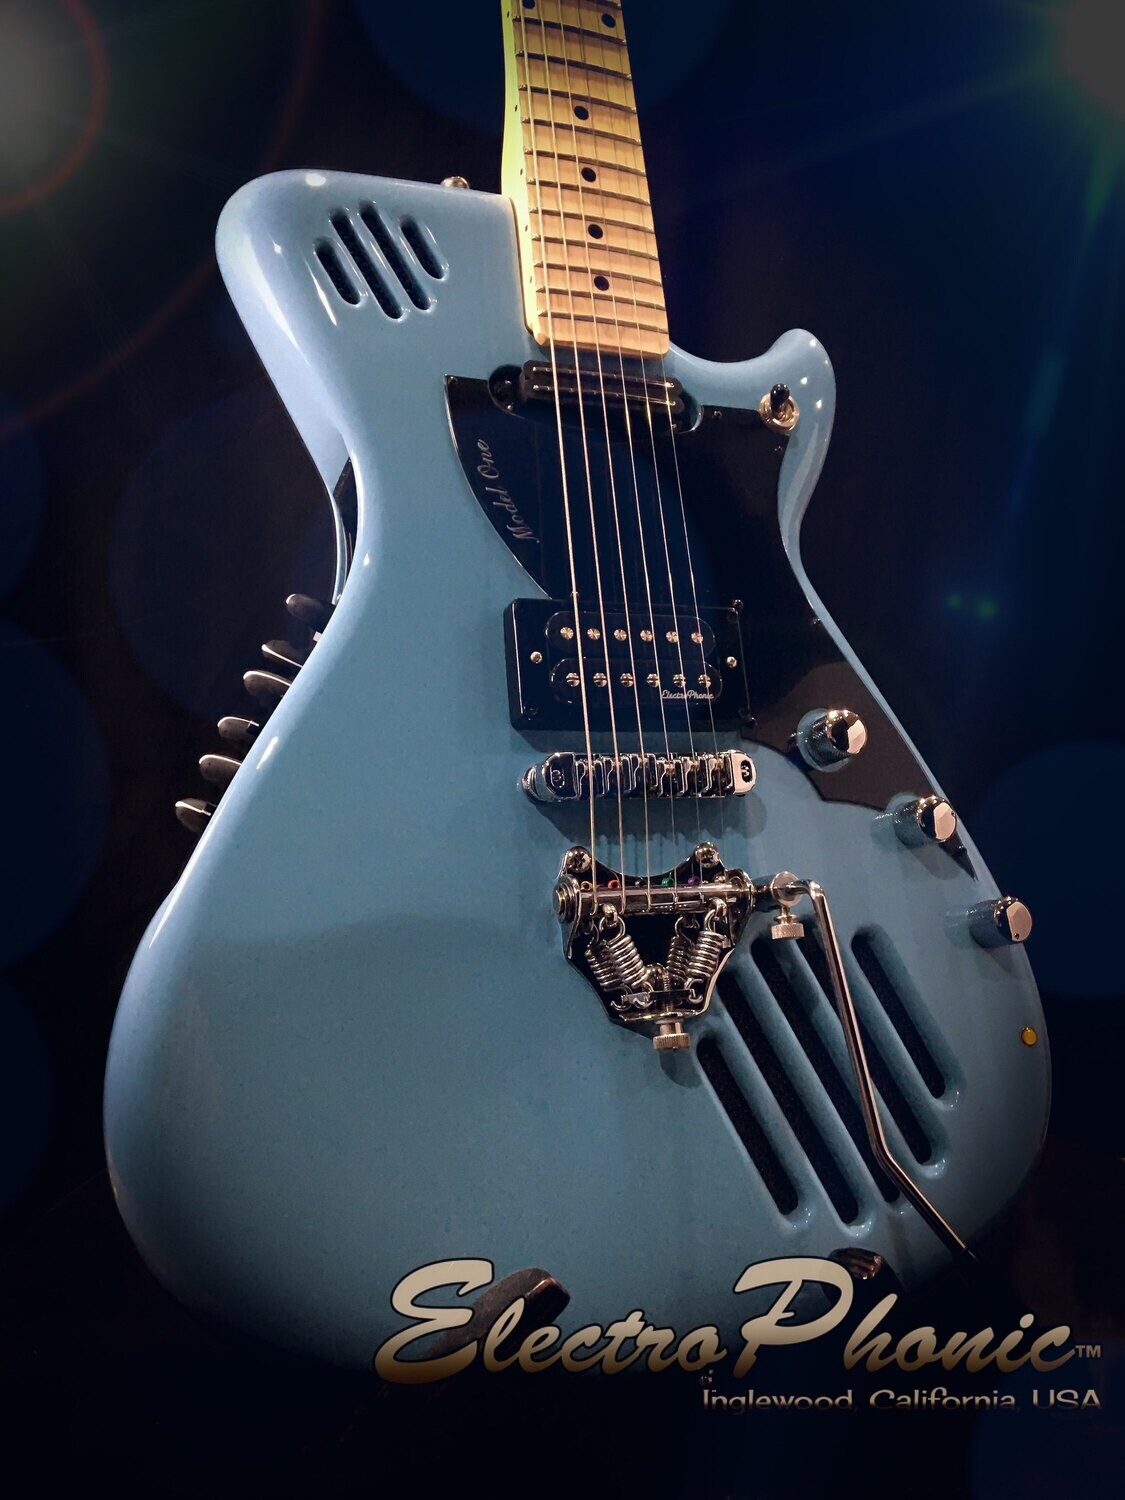 Discounted Standard Blue M1 with blemishes